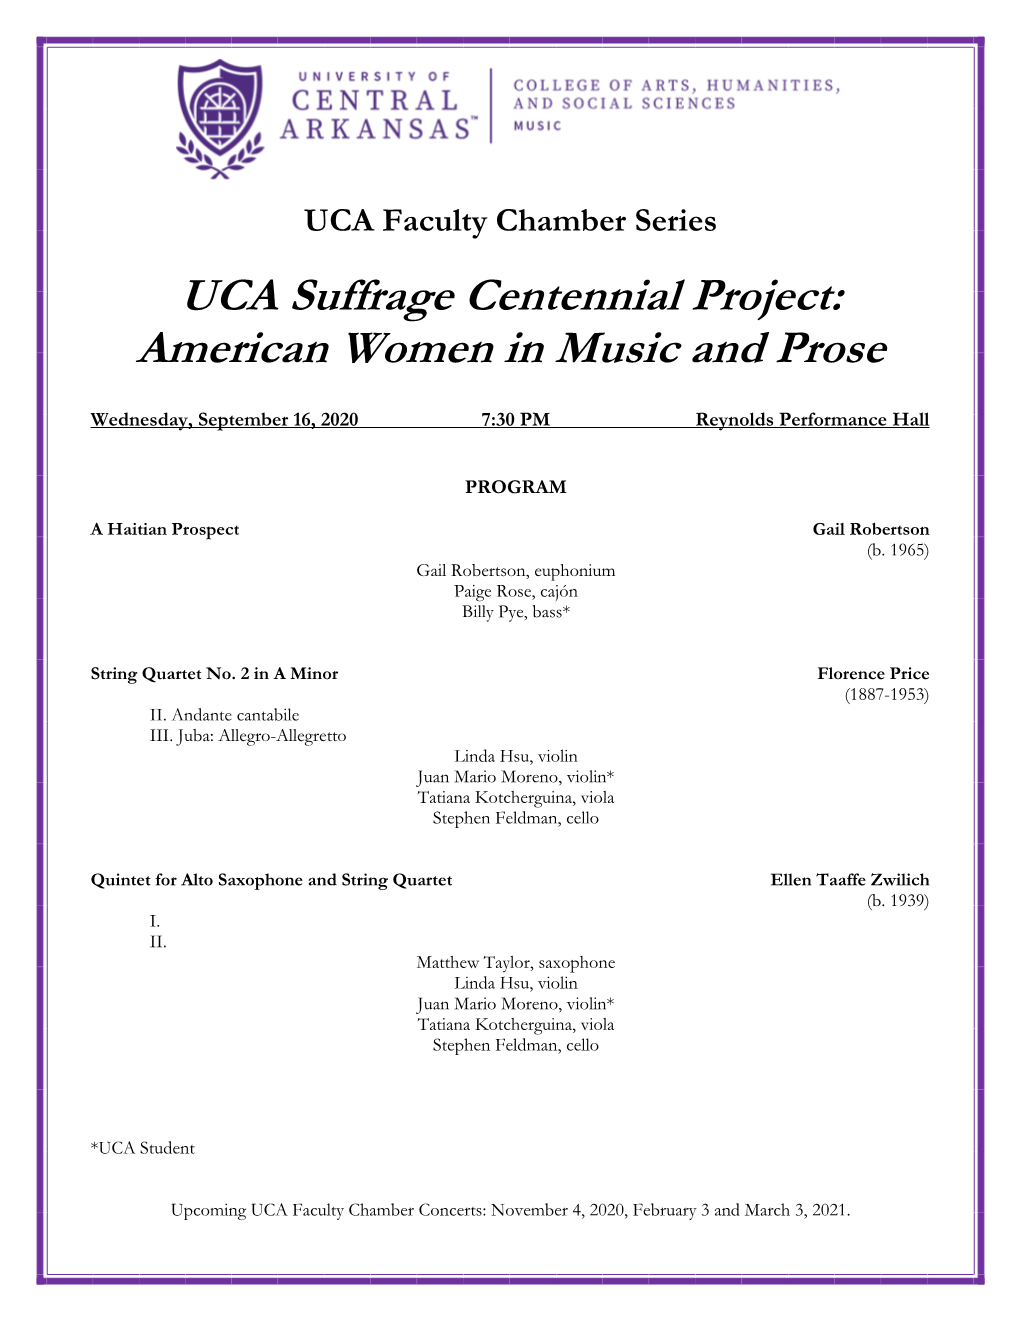 UCA Suffrage Centennial Project: American Women in Music and Prose